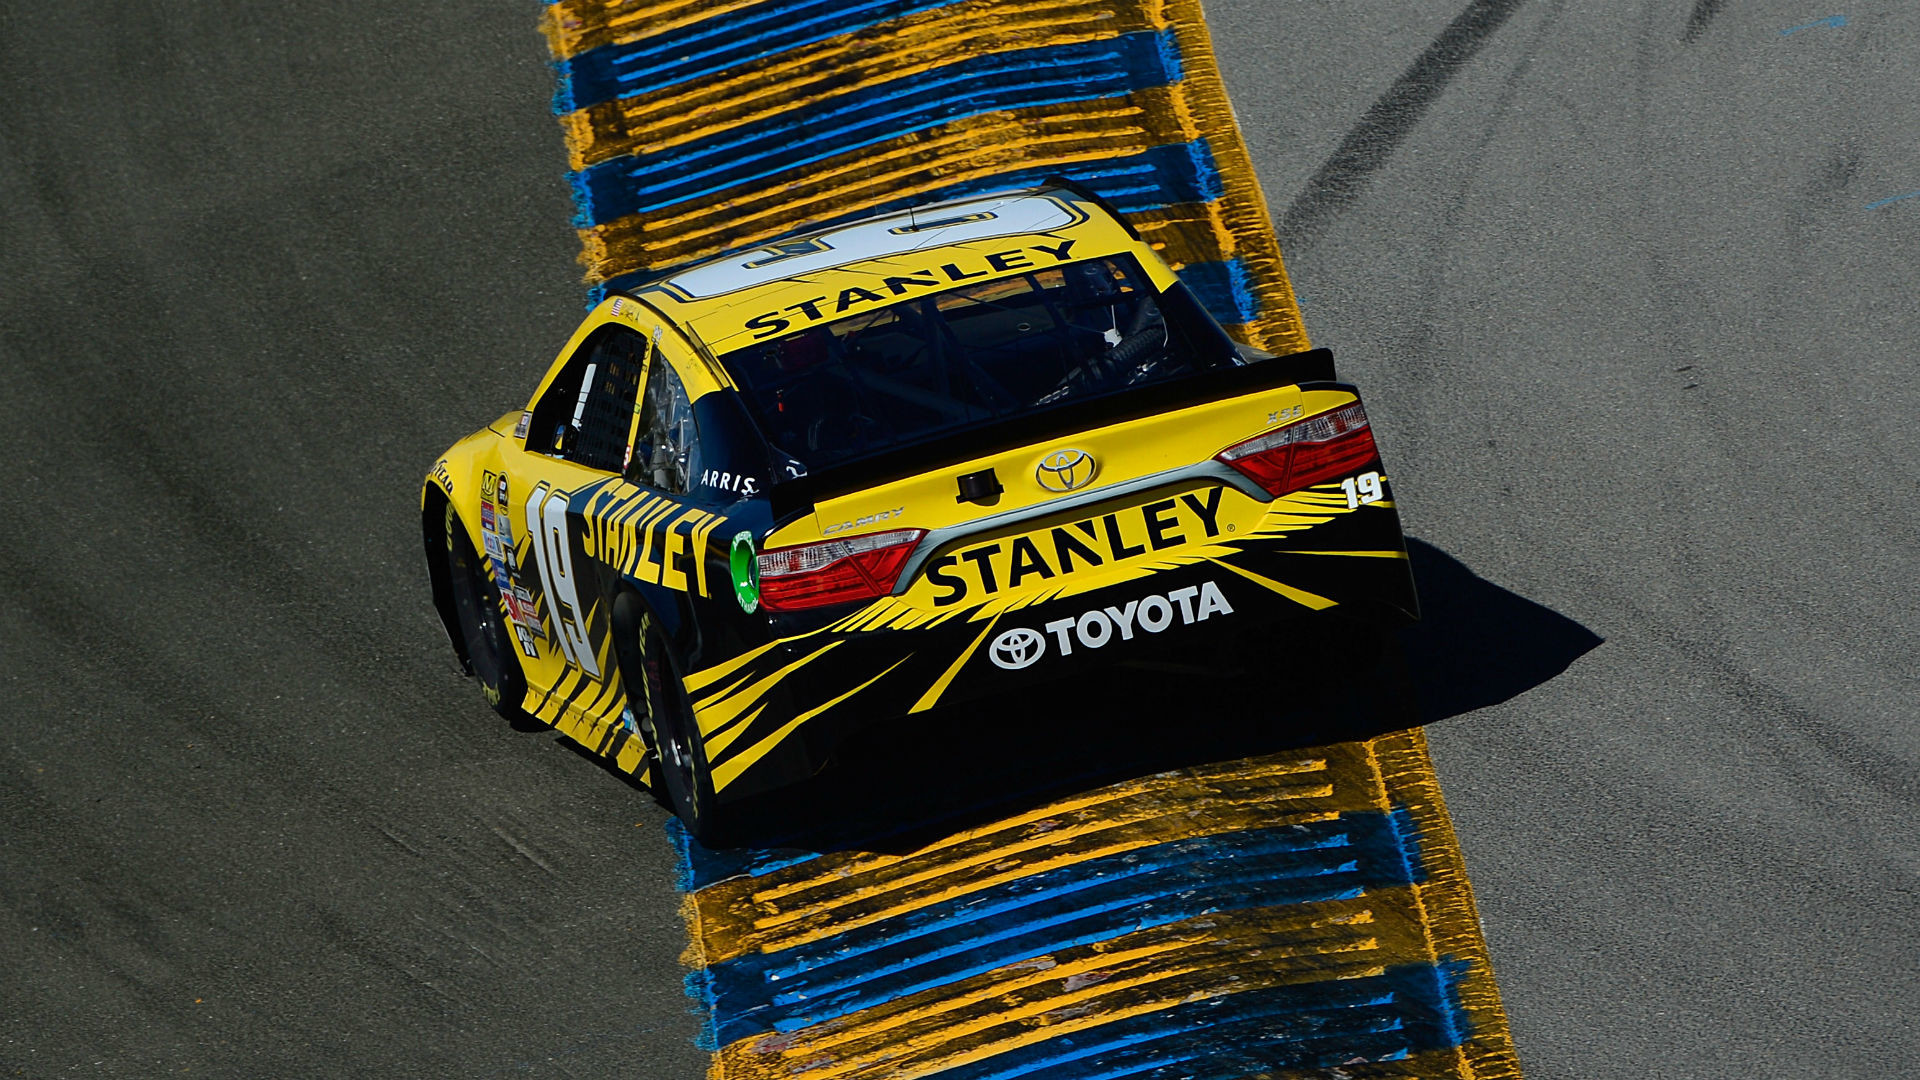 1920x1080 Sonoma starting lineup: Carl Edwards claims pole; green flag 3:20 ET |  NASCAR | Sporting News